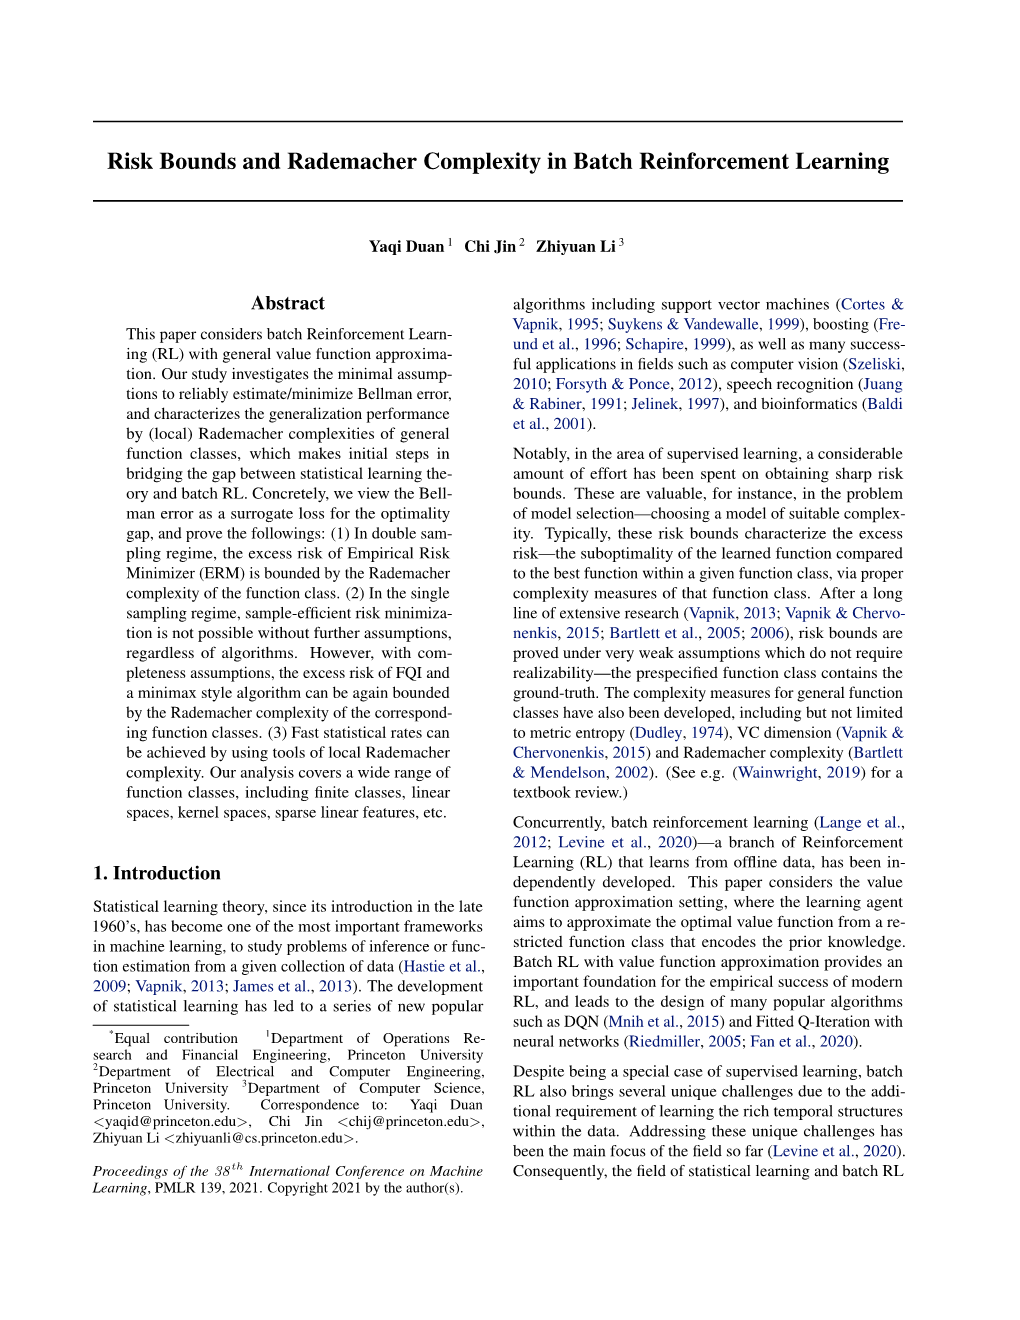 Risk Bounds and Rademacher Complexity in Batch Reinforcement Learning